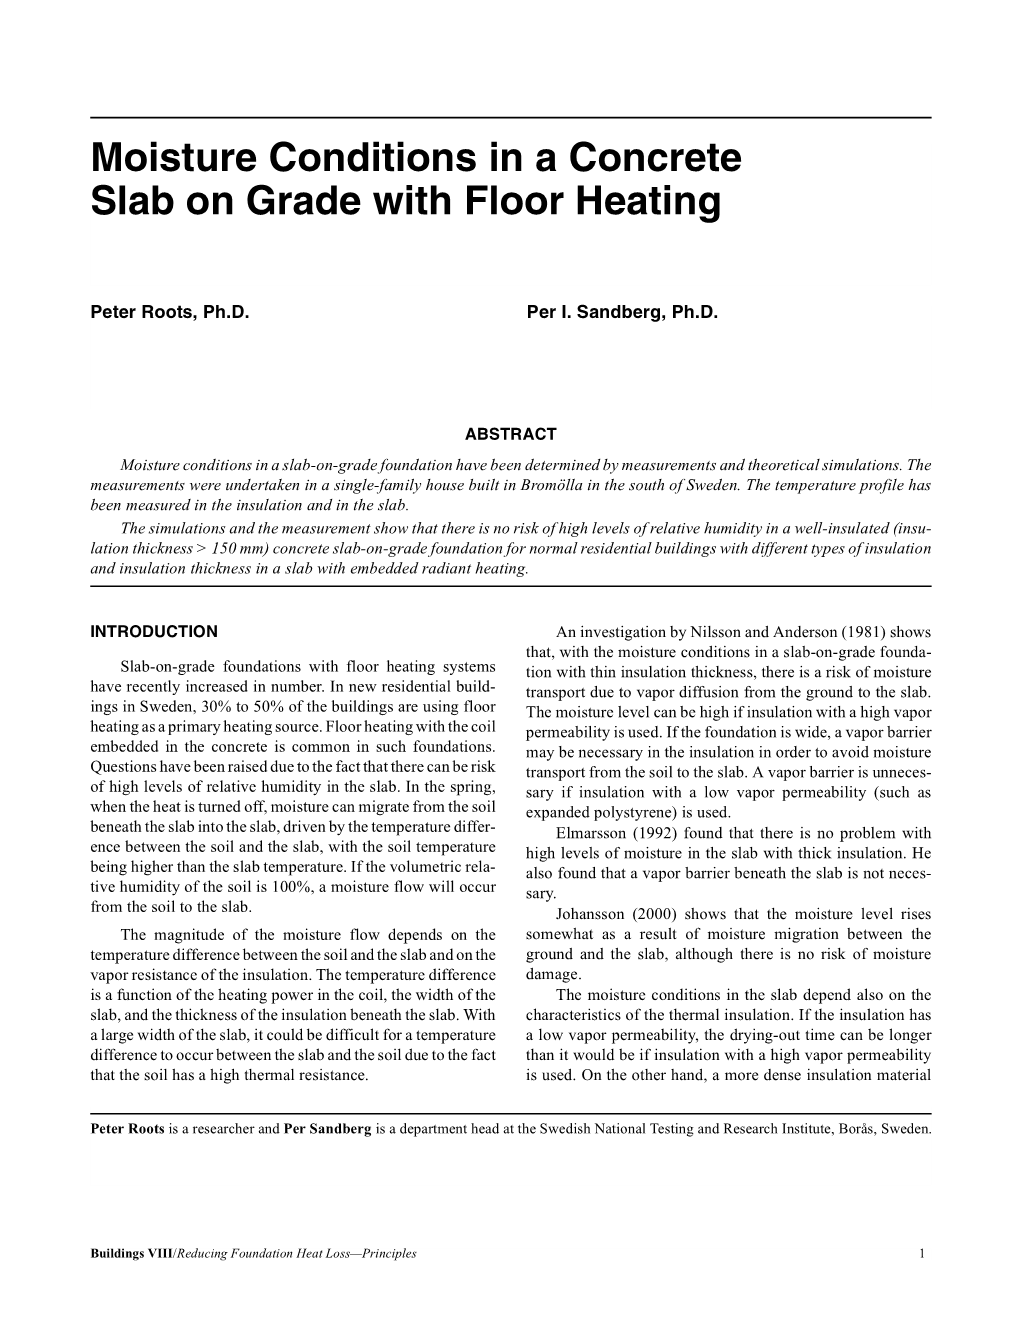 Moisture Conditions in a Concrete Slab on Grade with Floor Heating